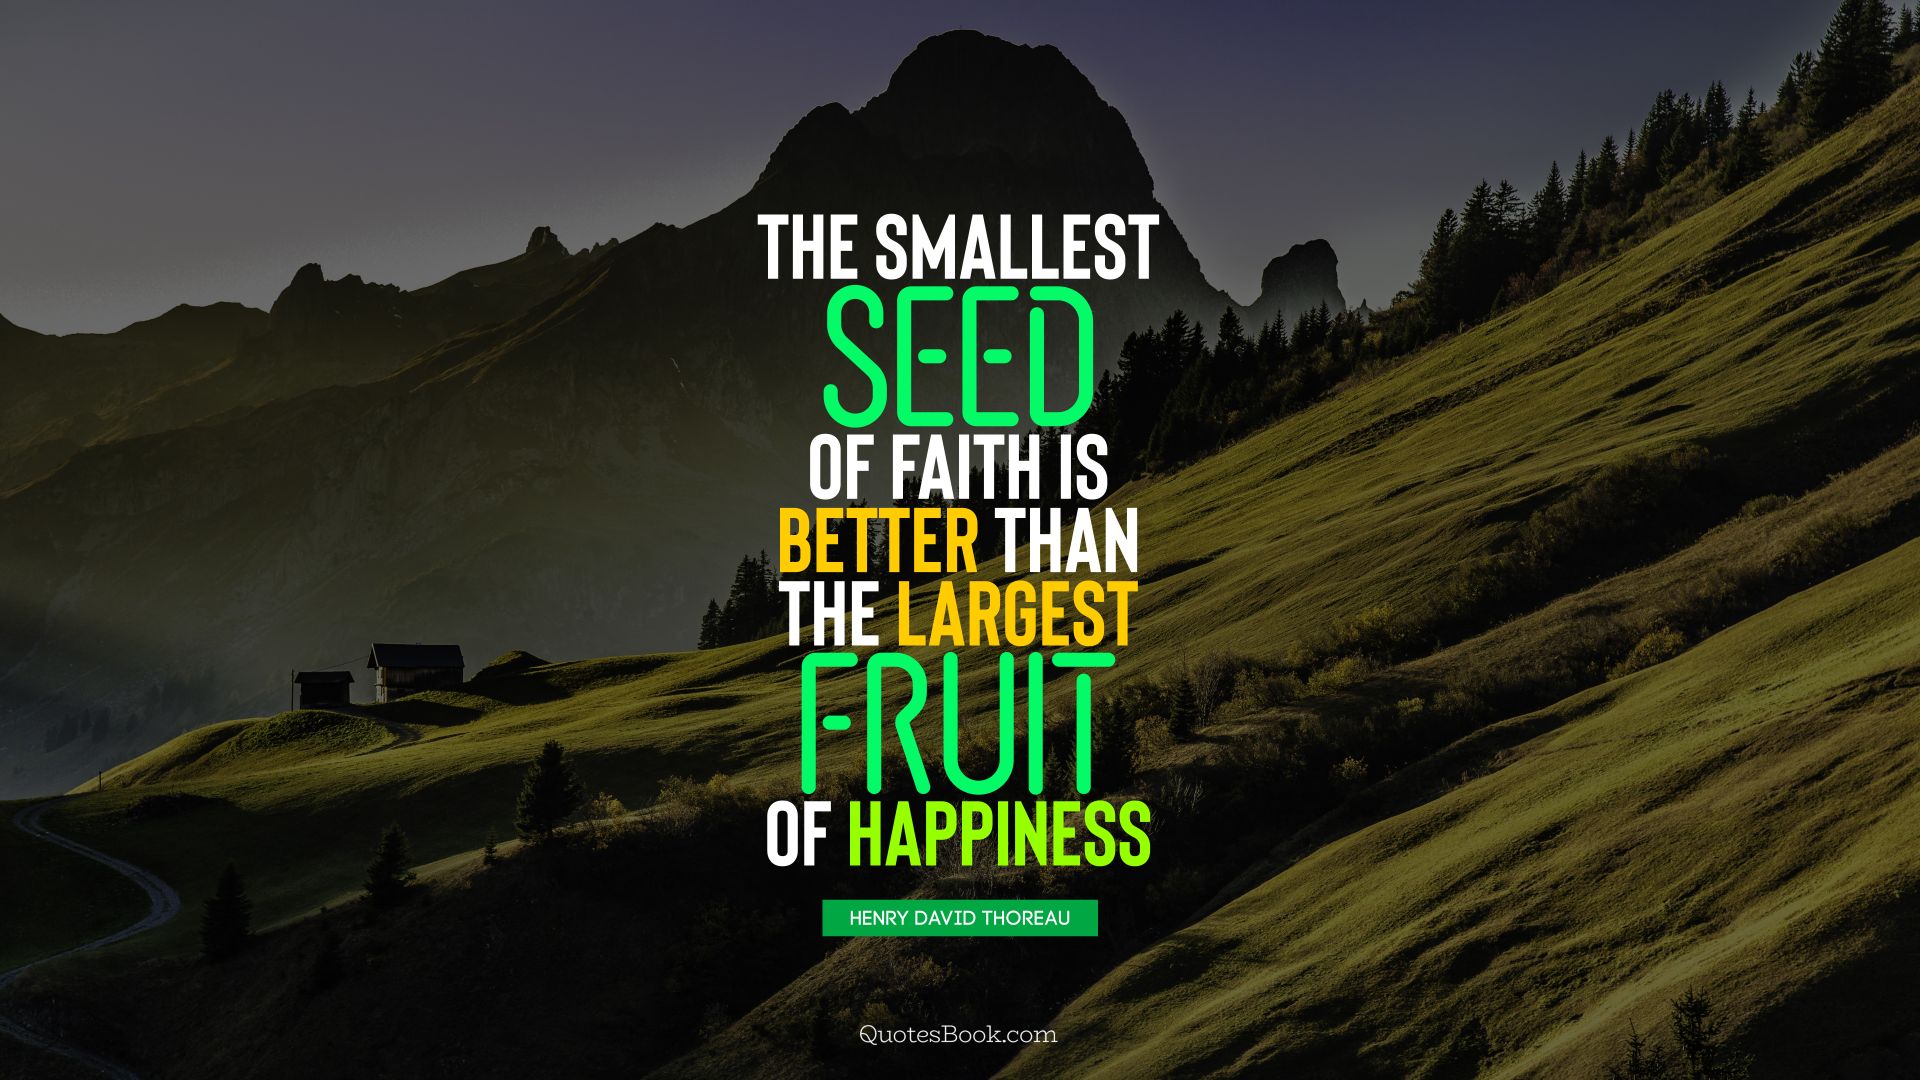 The smallest seed of faith is better than the largest fruit of happiness. - Quote by Henry David Thoreau